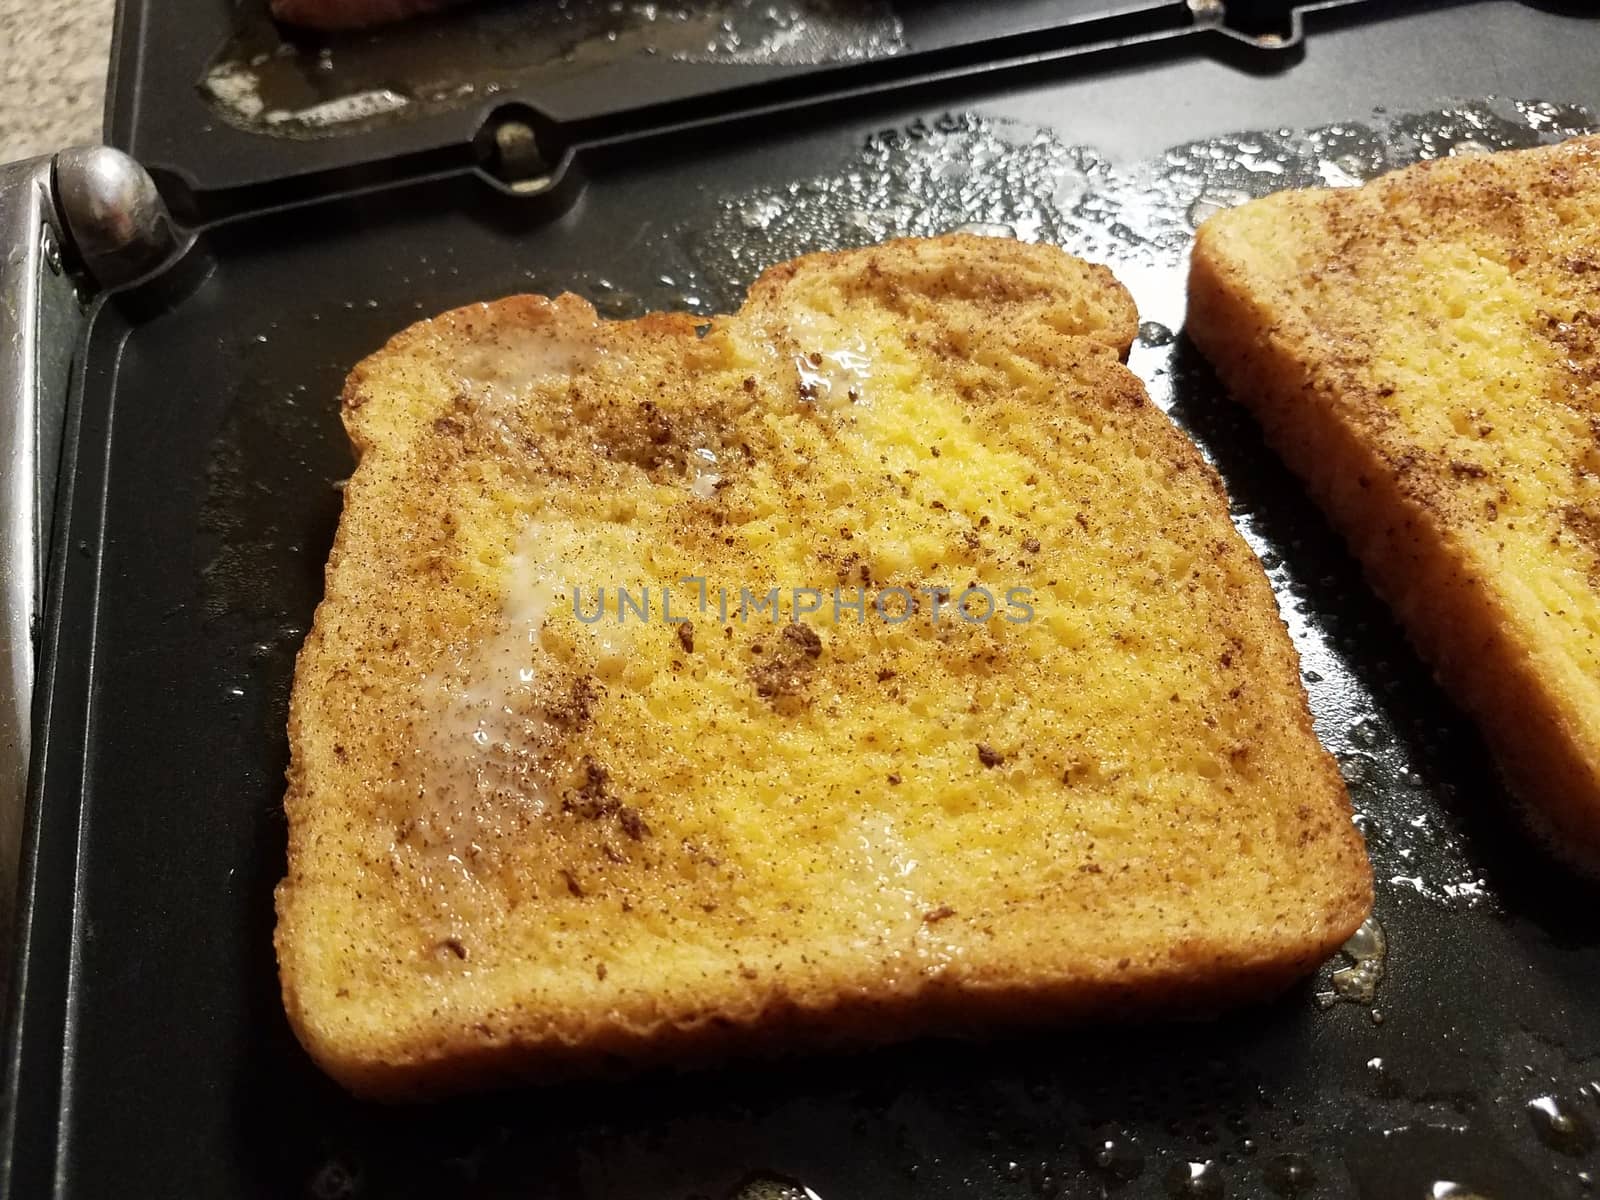 French toast bread with egg and cinnamon cooking on grill or griddle